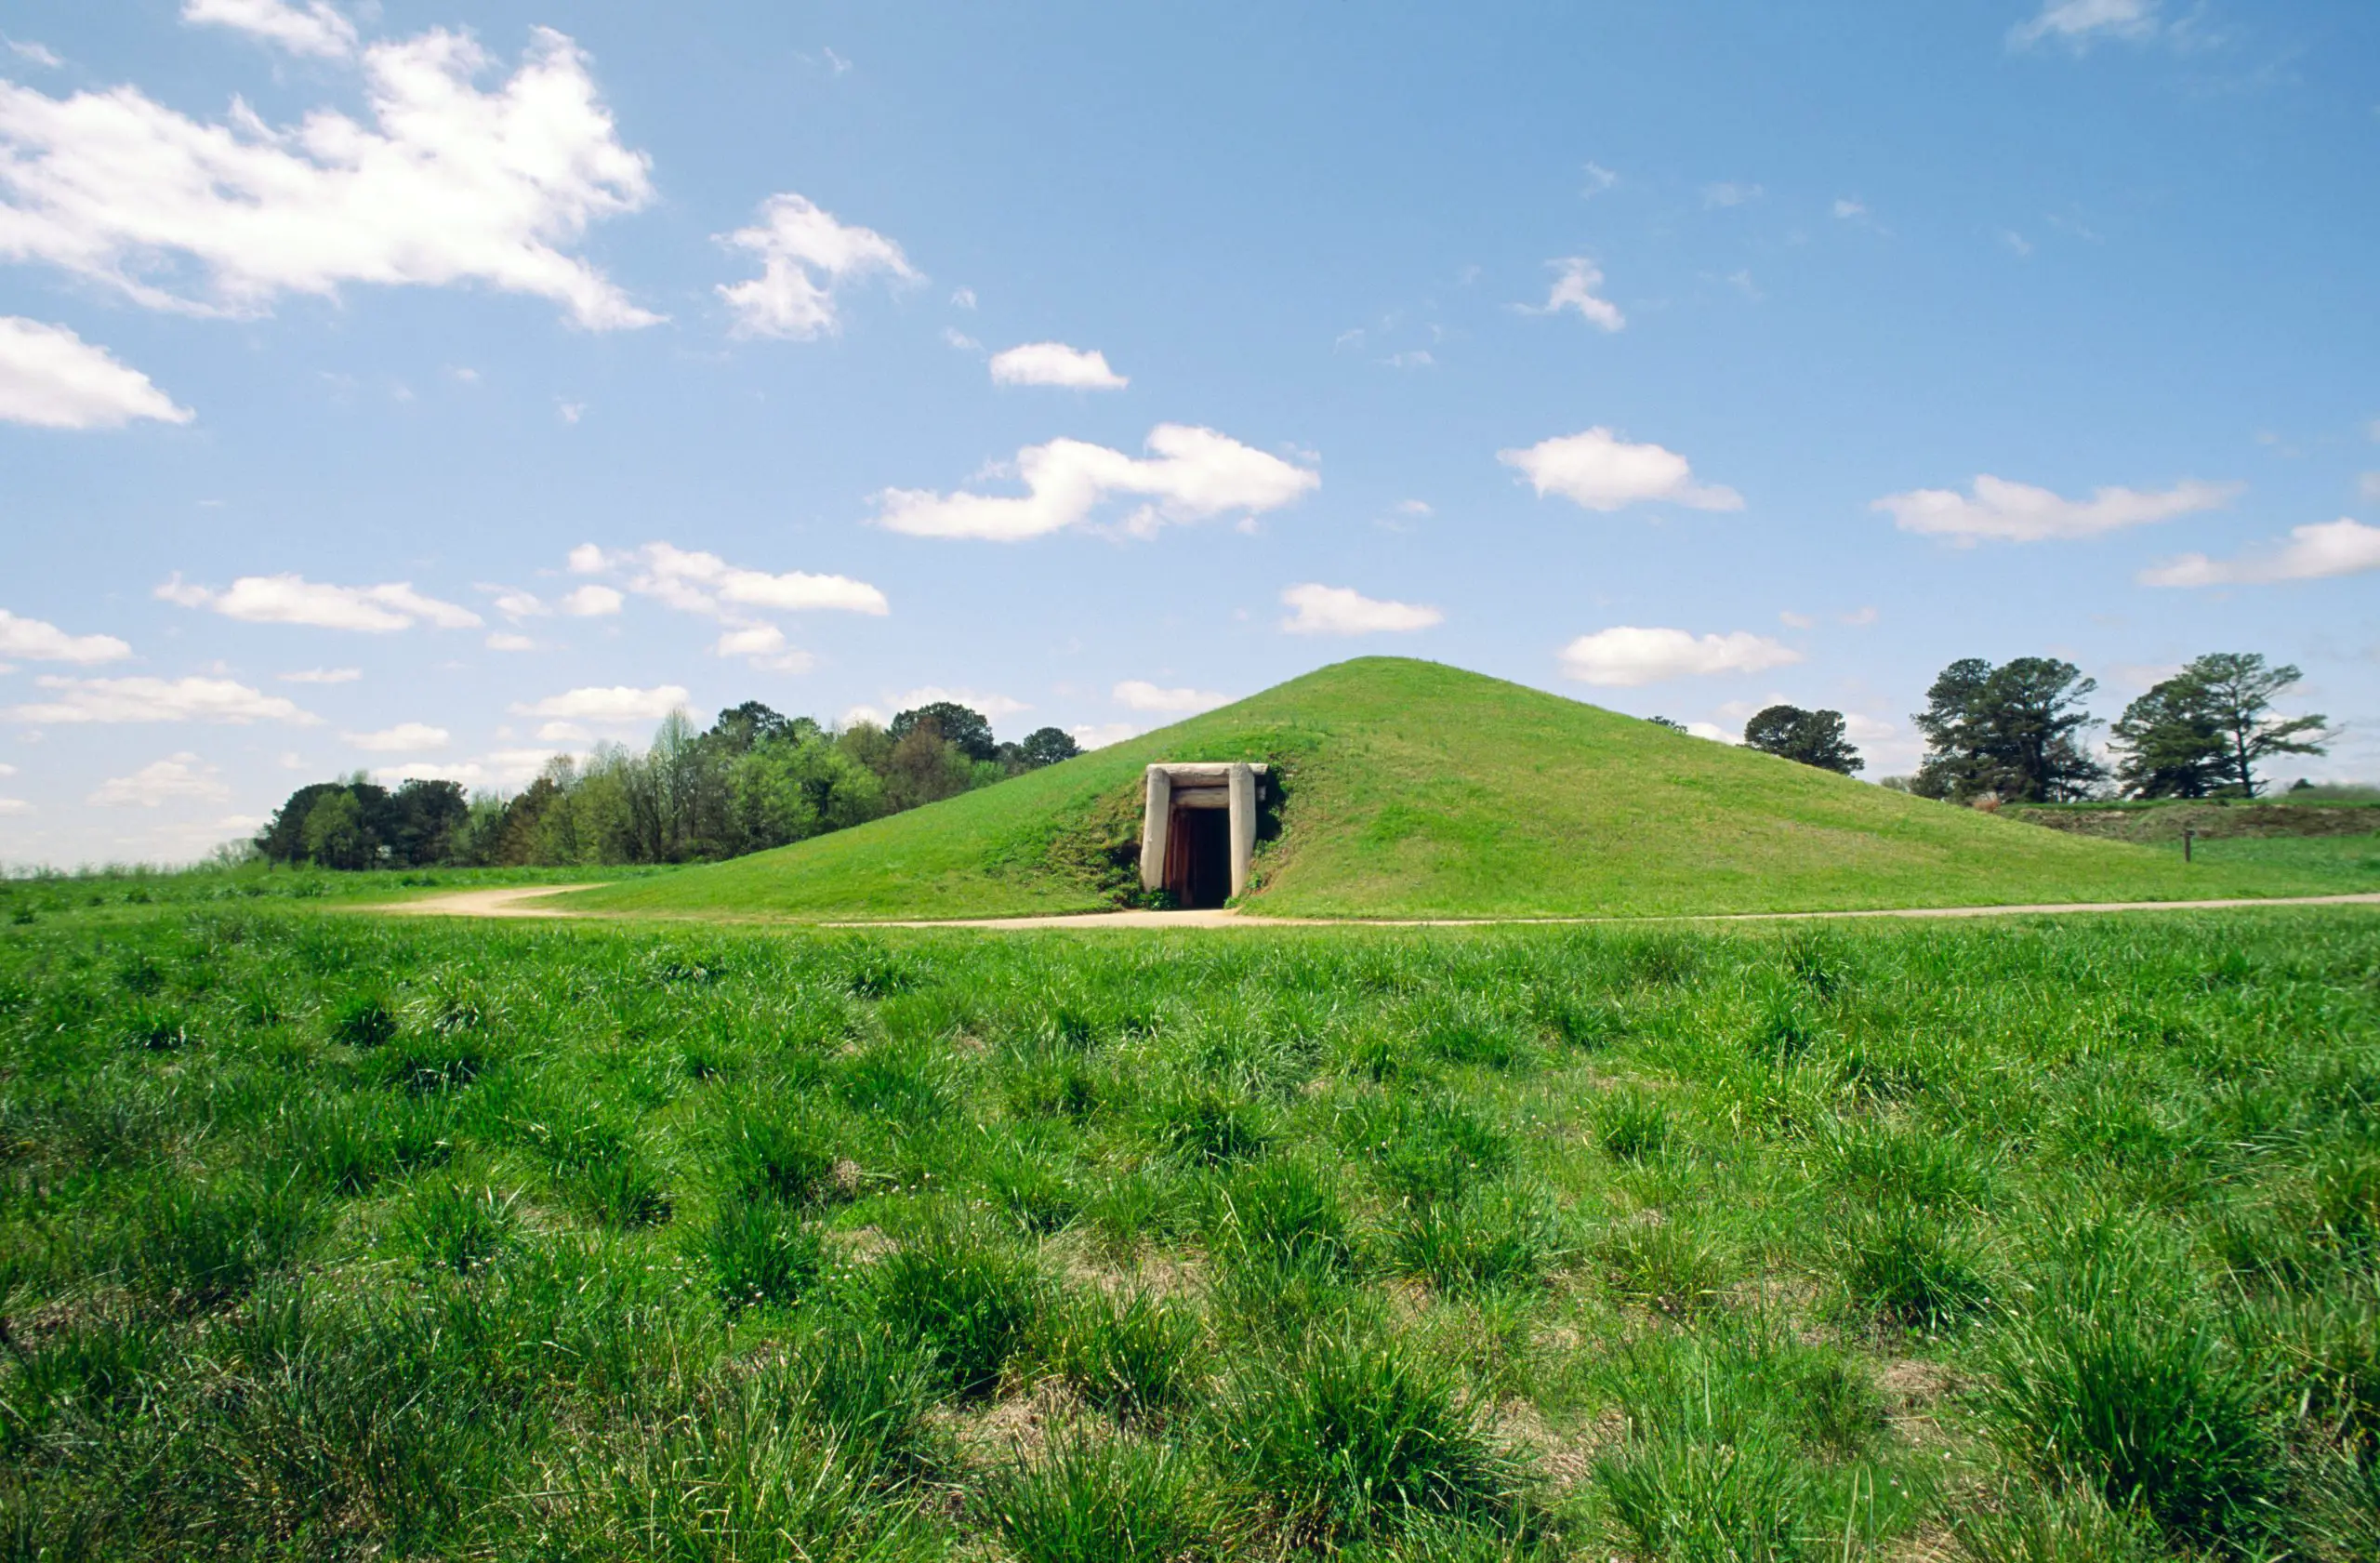 Georgia’s Ocmulgee Mounds May Be America’s Next National Park